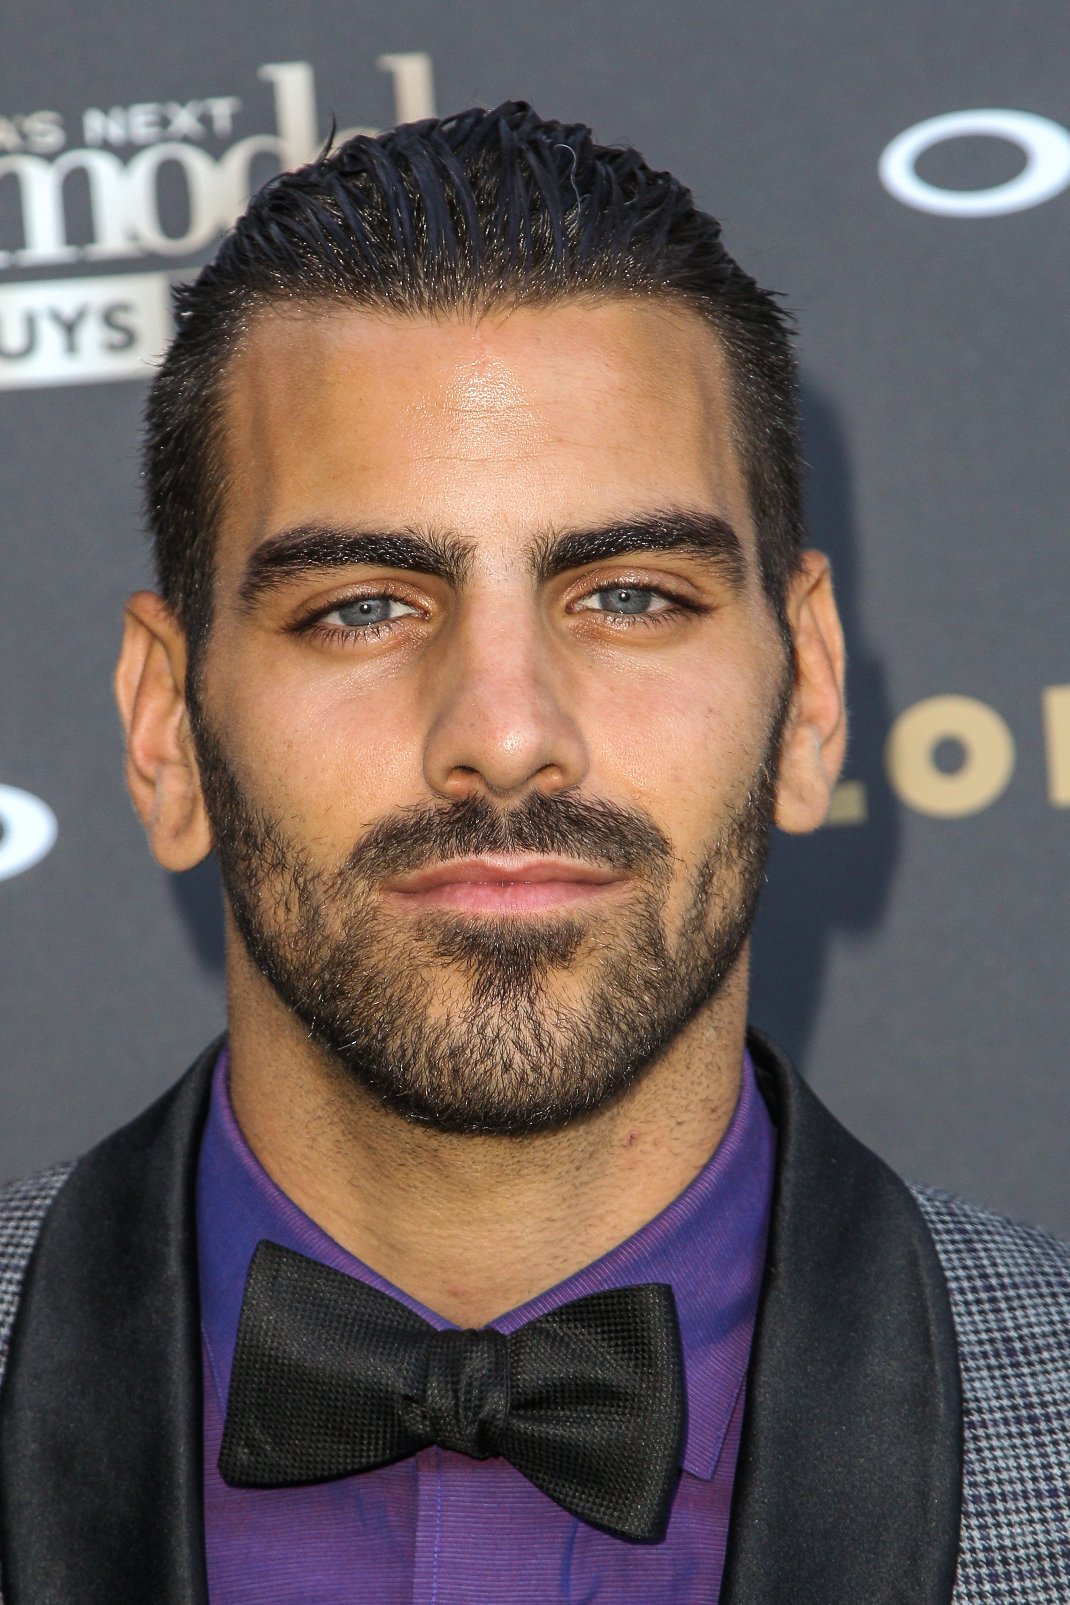 Nyle DiMarco/ap images